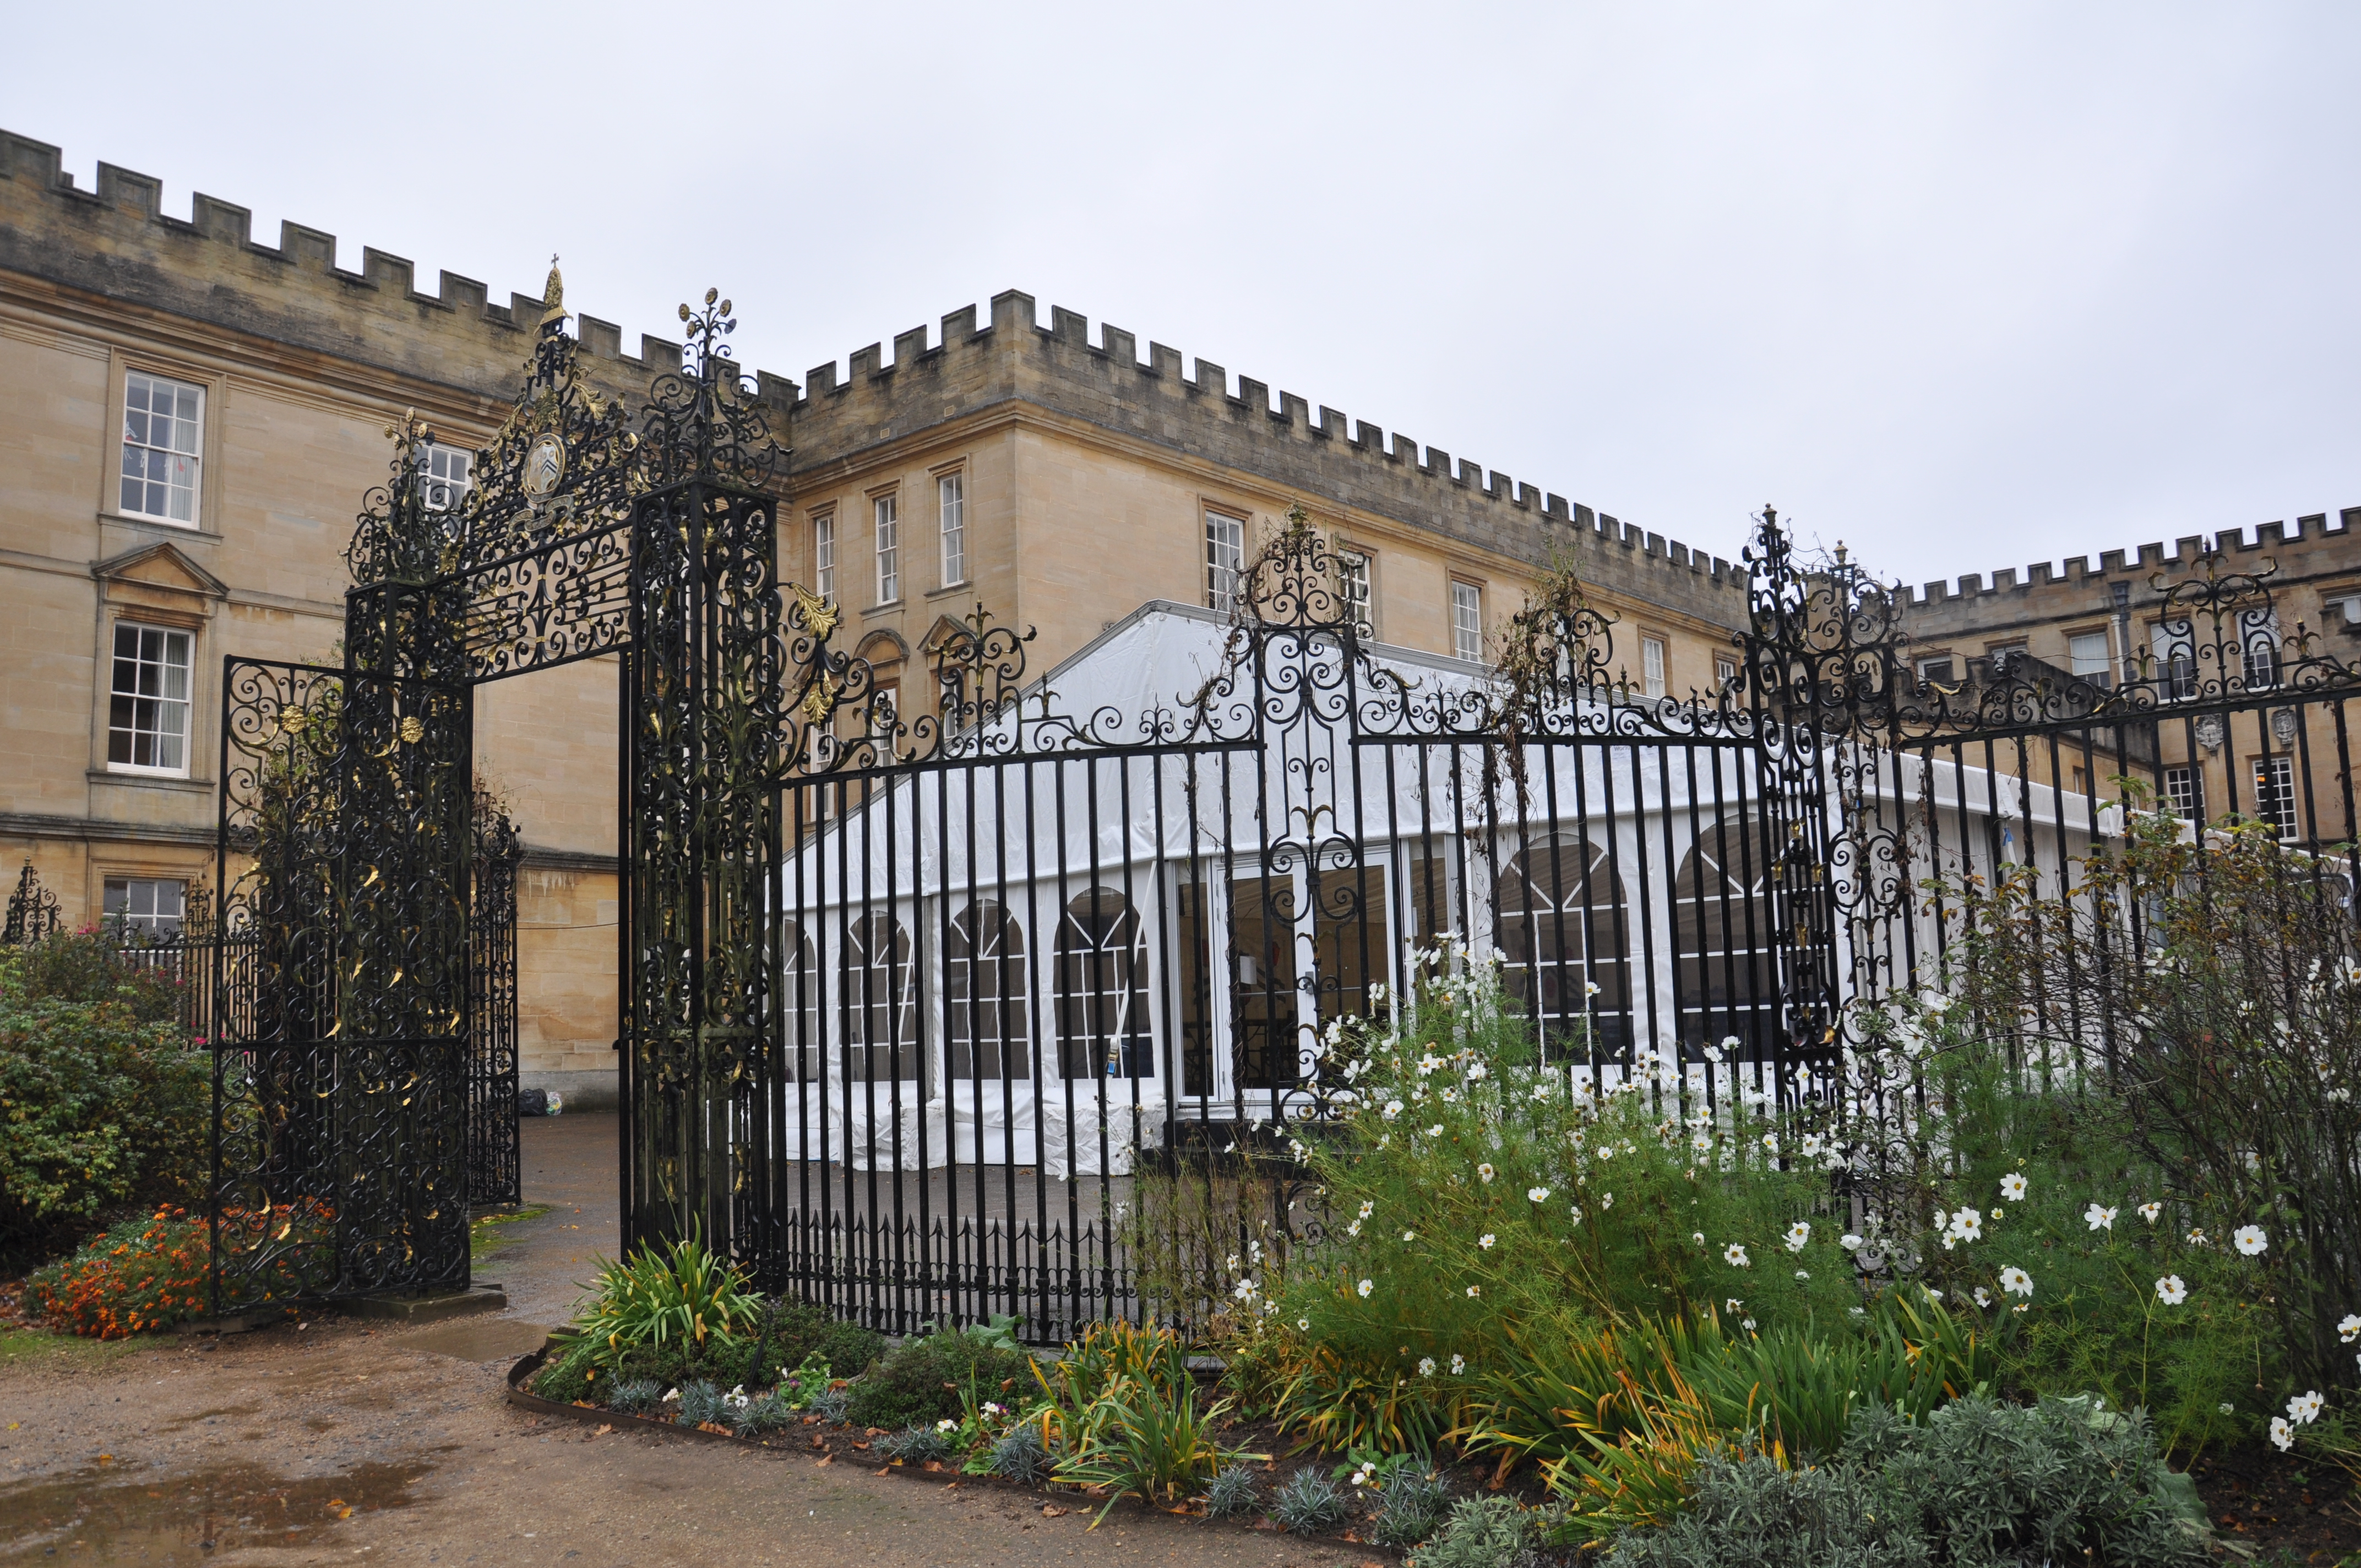 The marquee in Garden Quad, behind the iron screen